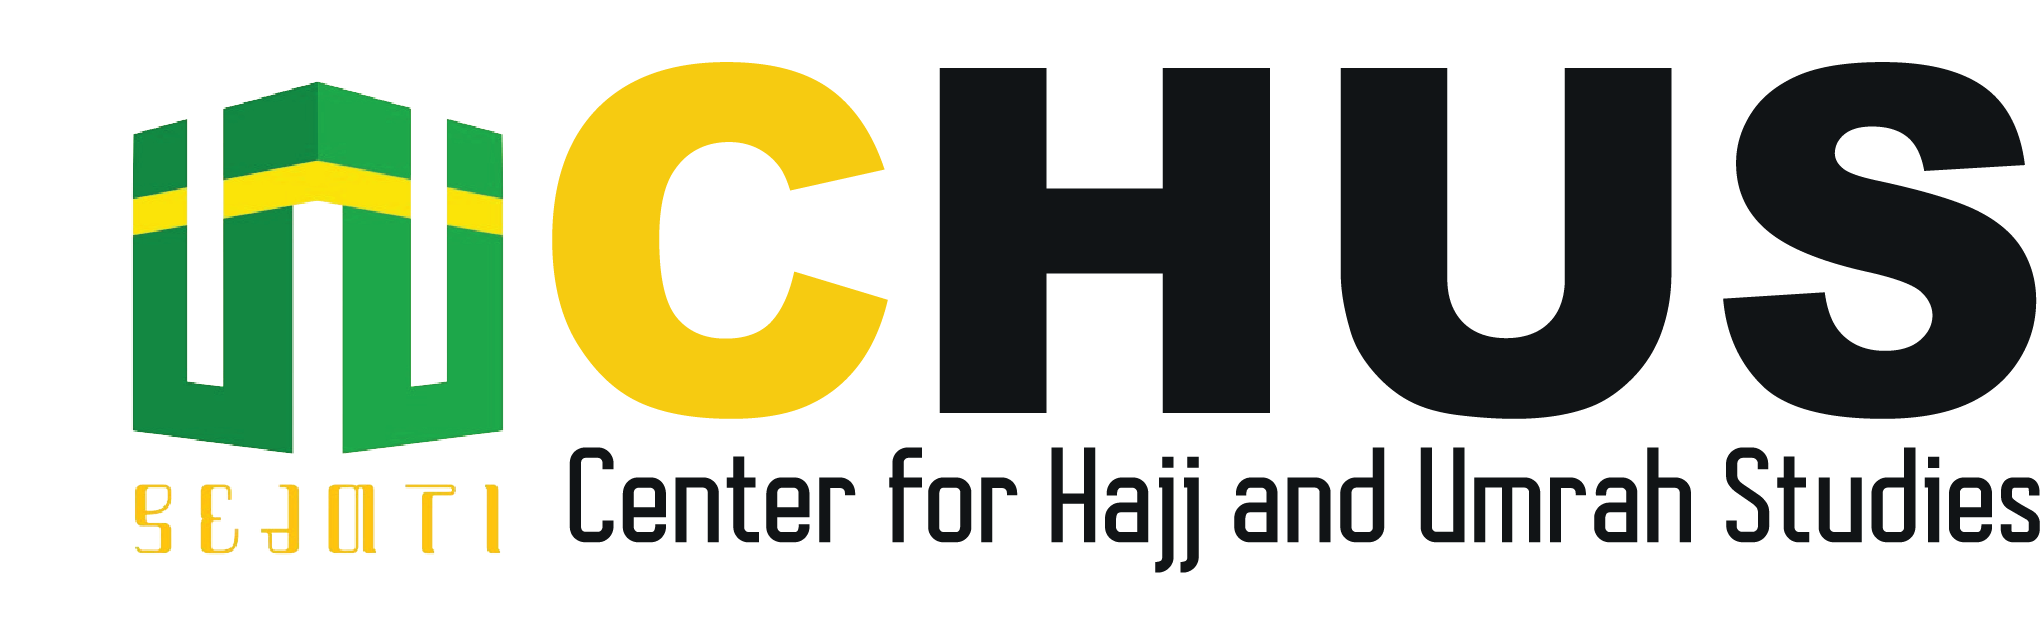 CHUS - Central Of Hajj and Umrah Studies